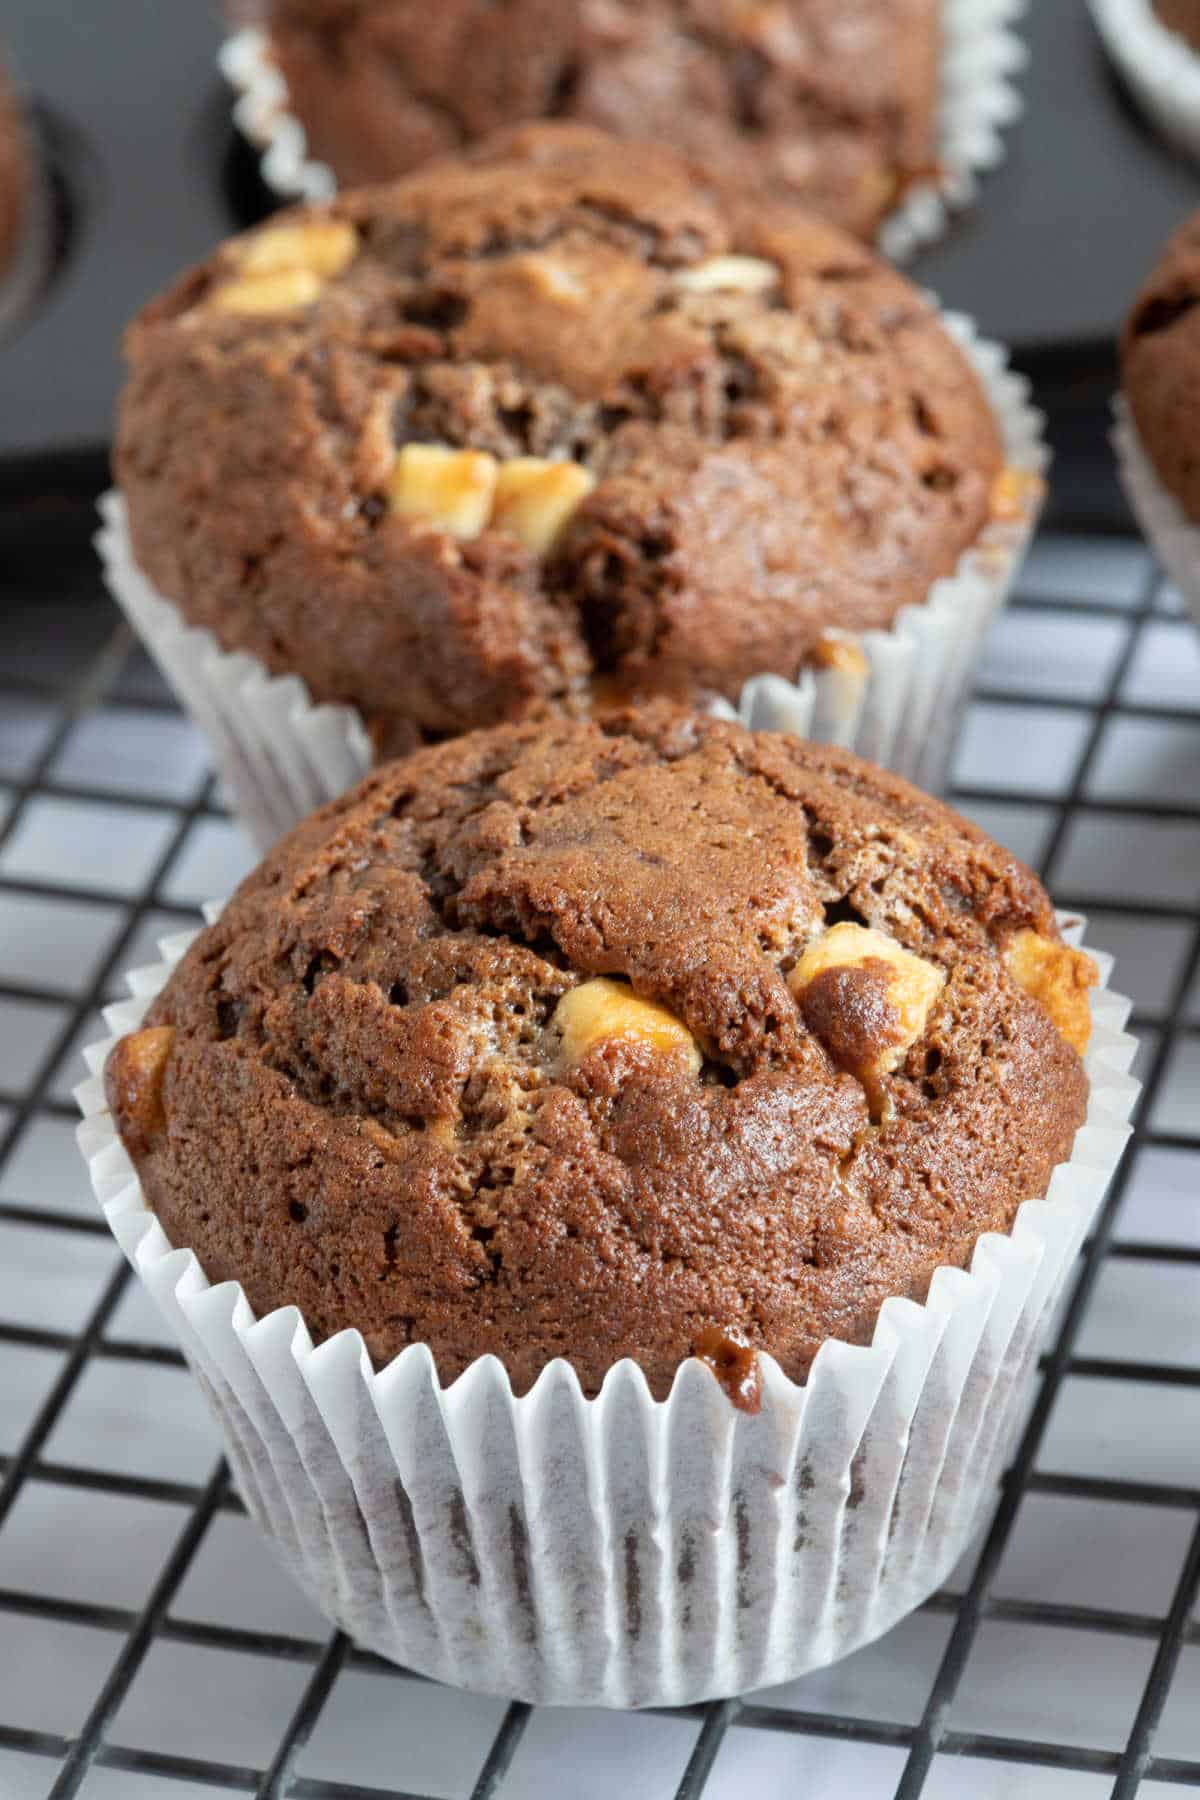 A chocolate banana muffin with white chocolate chips.